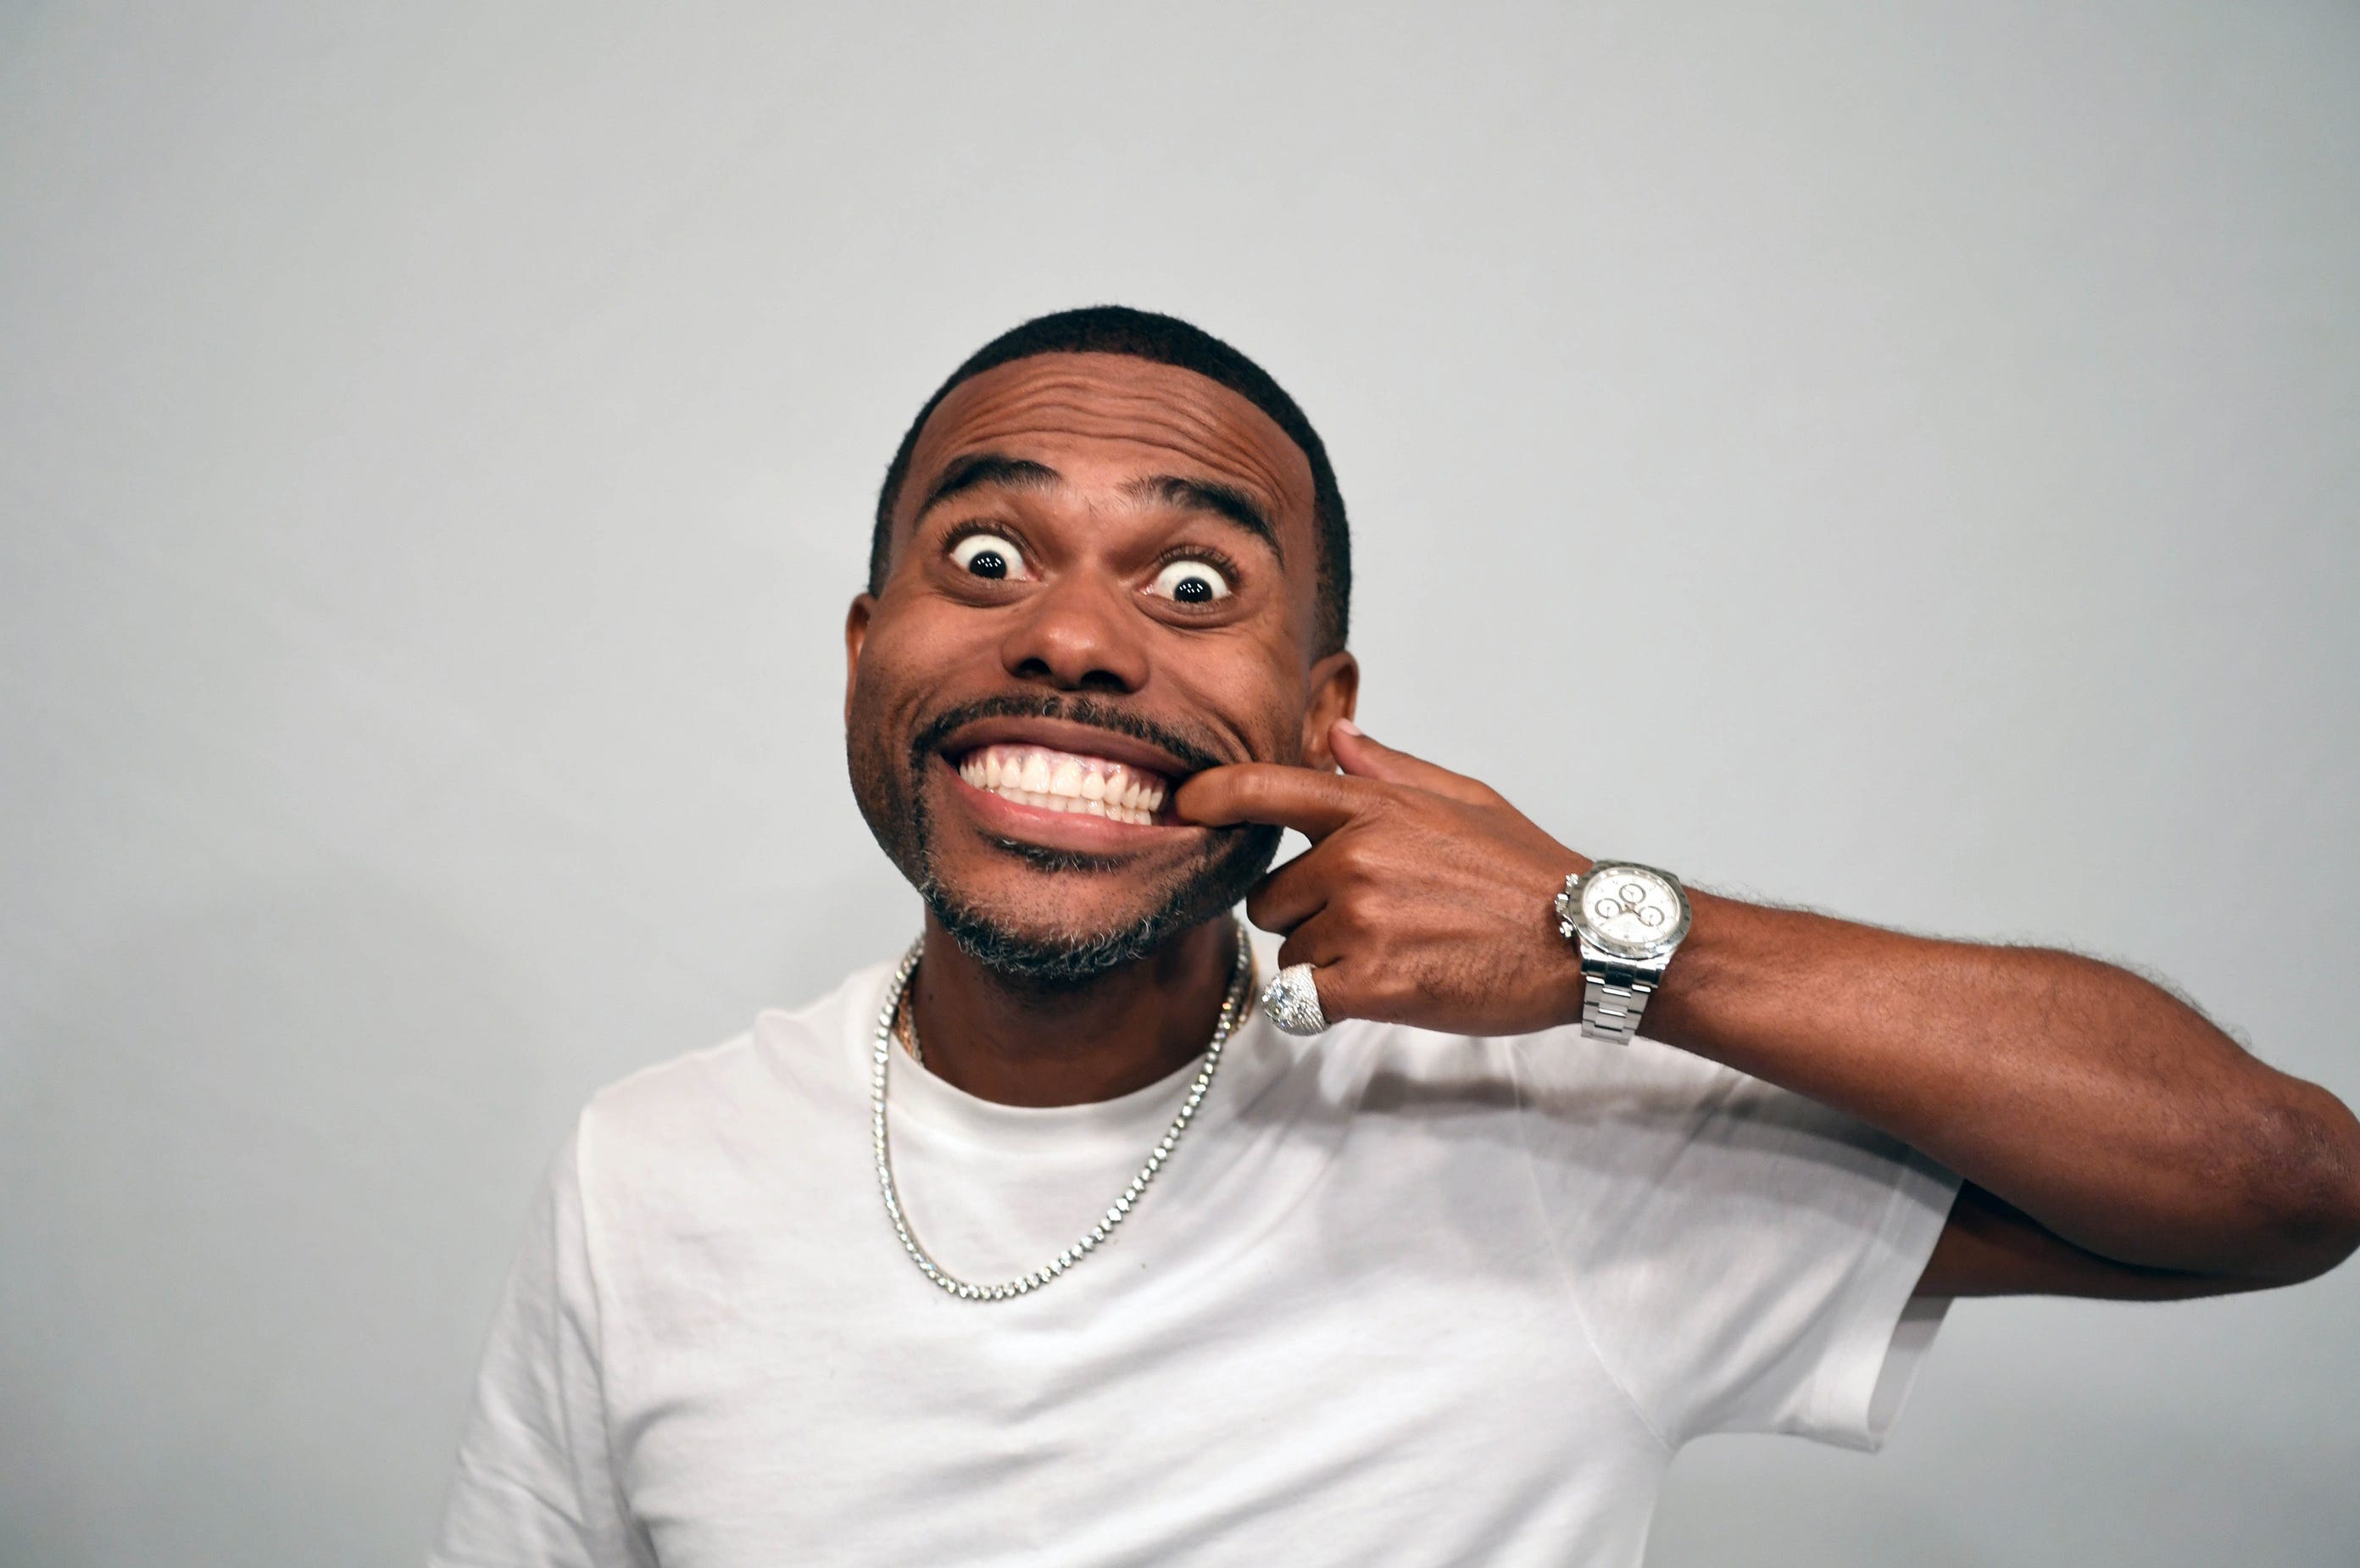 Want to win two tickets to see Lil Duval in Charlotte? CLTure